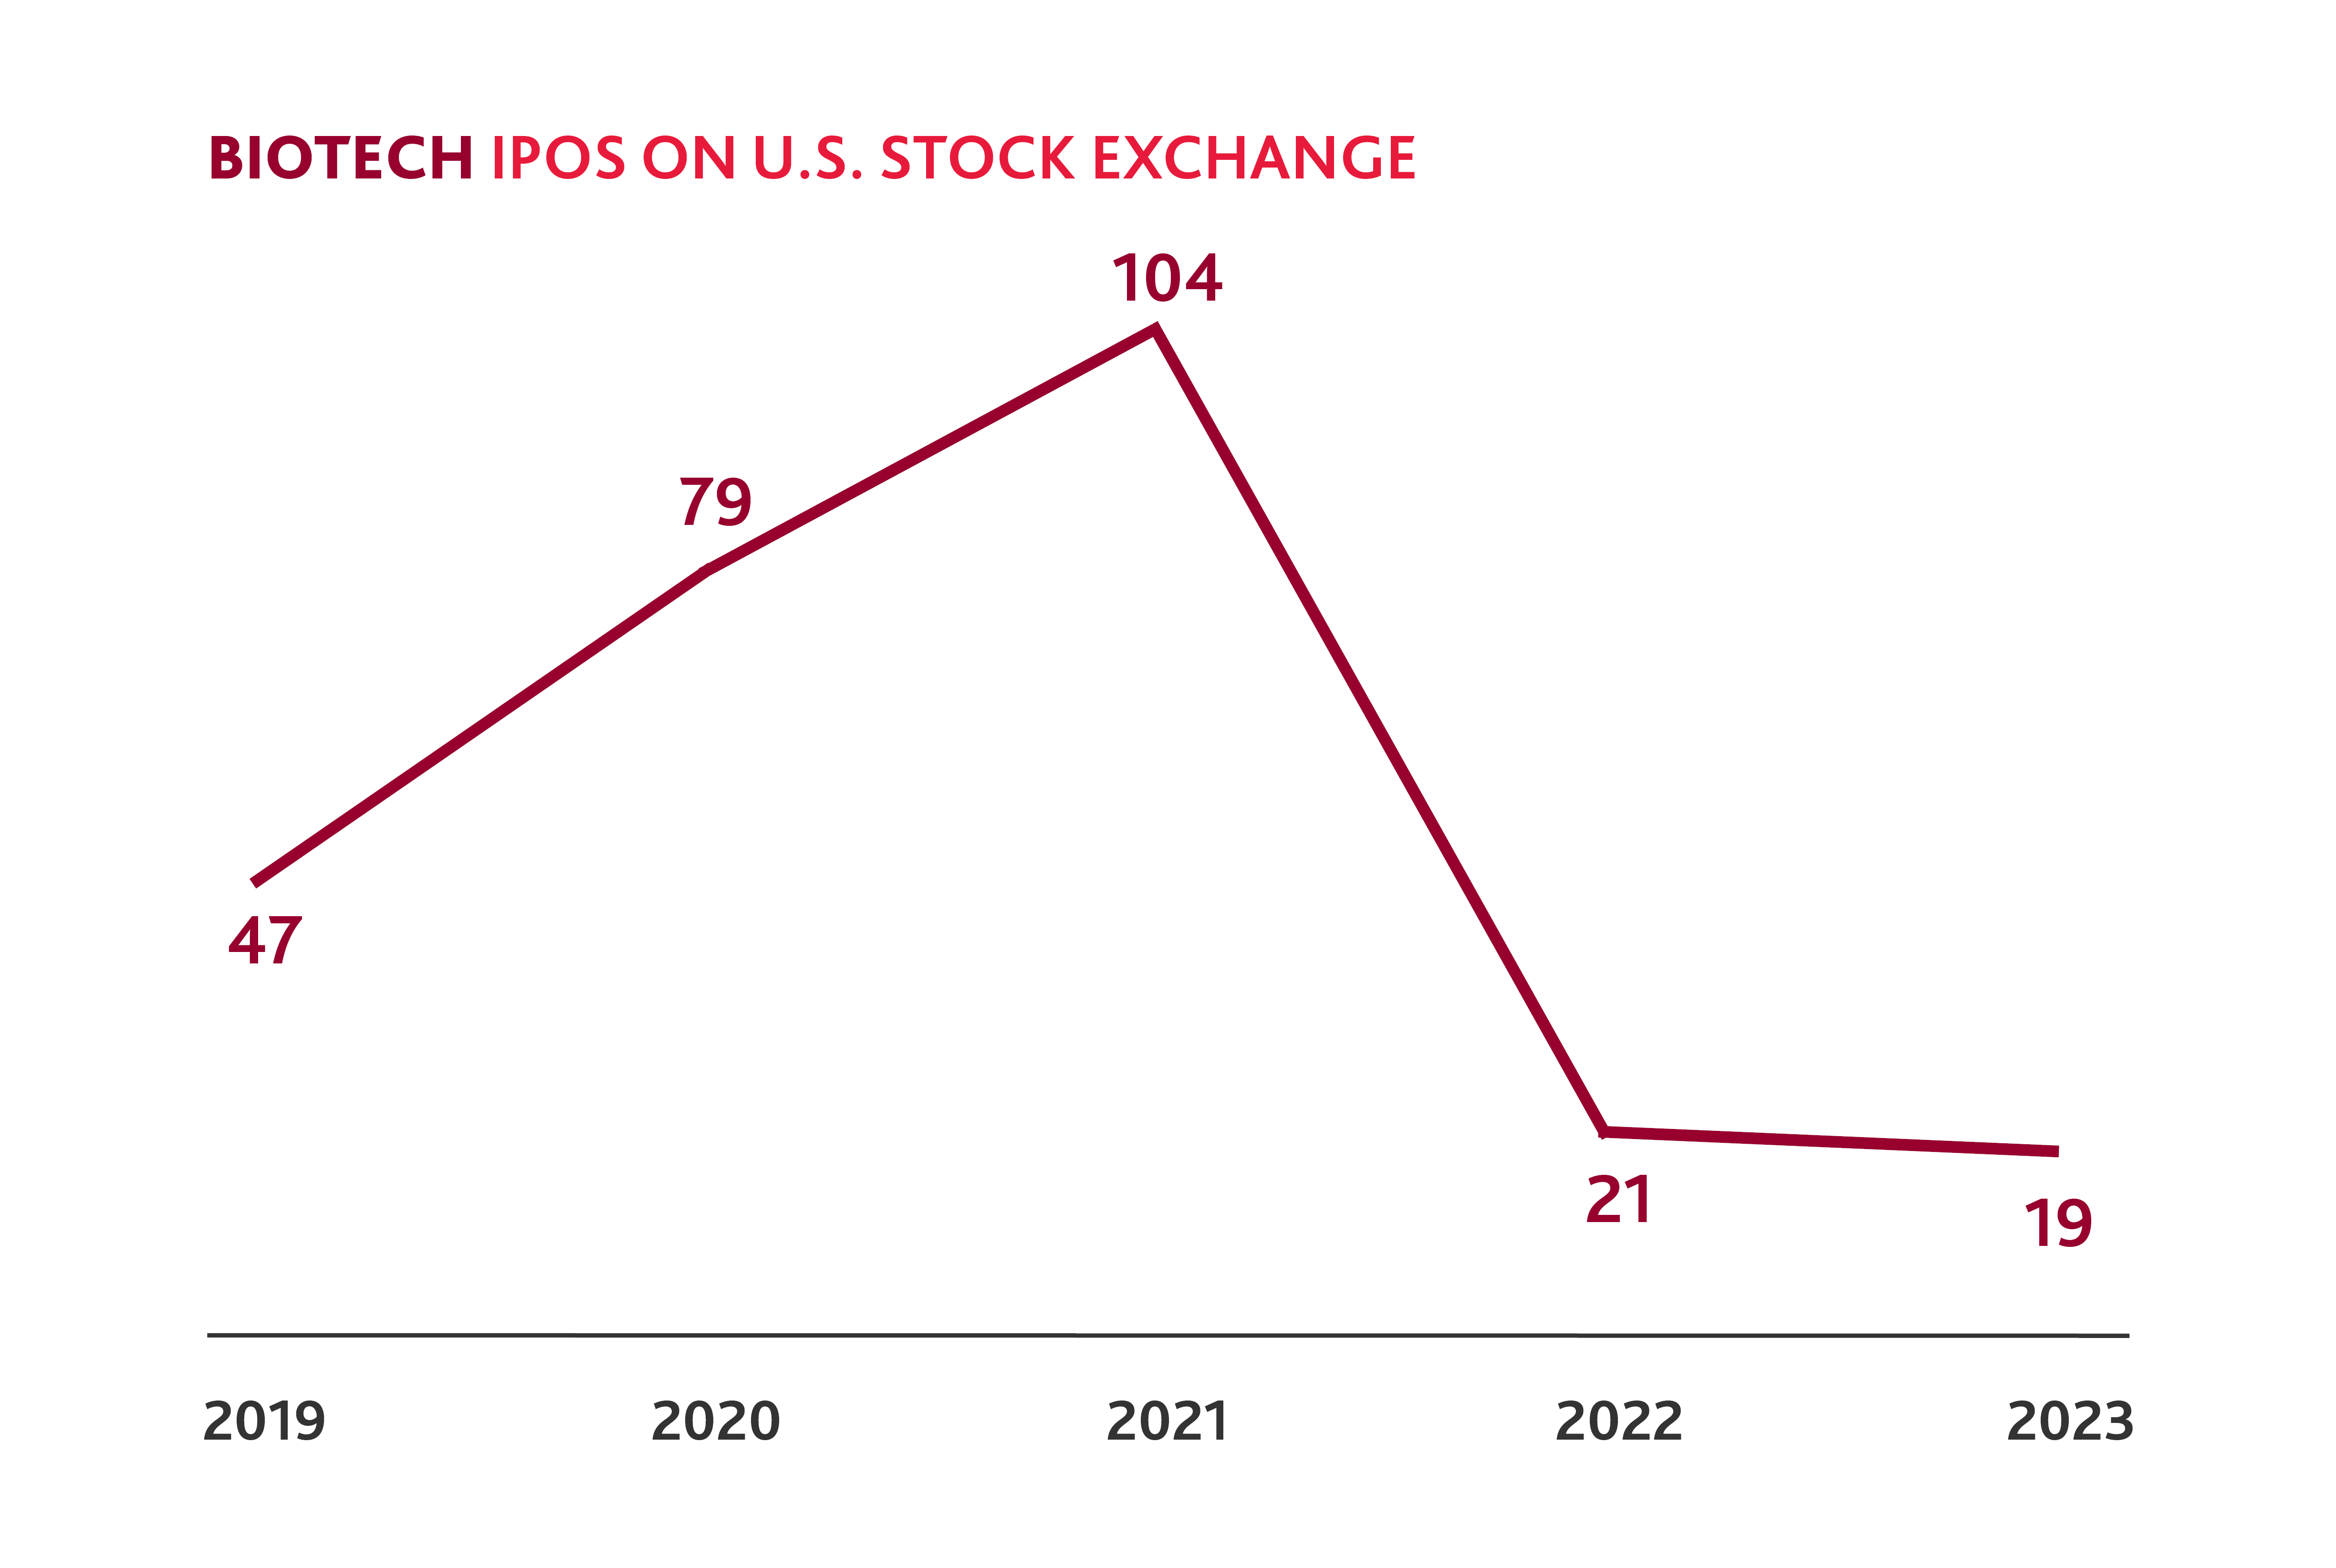 Chart showing IPOs on U.S. stock exchange from 2019 to 2023